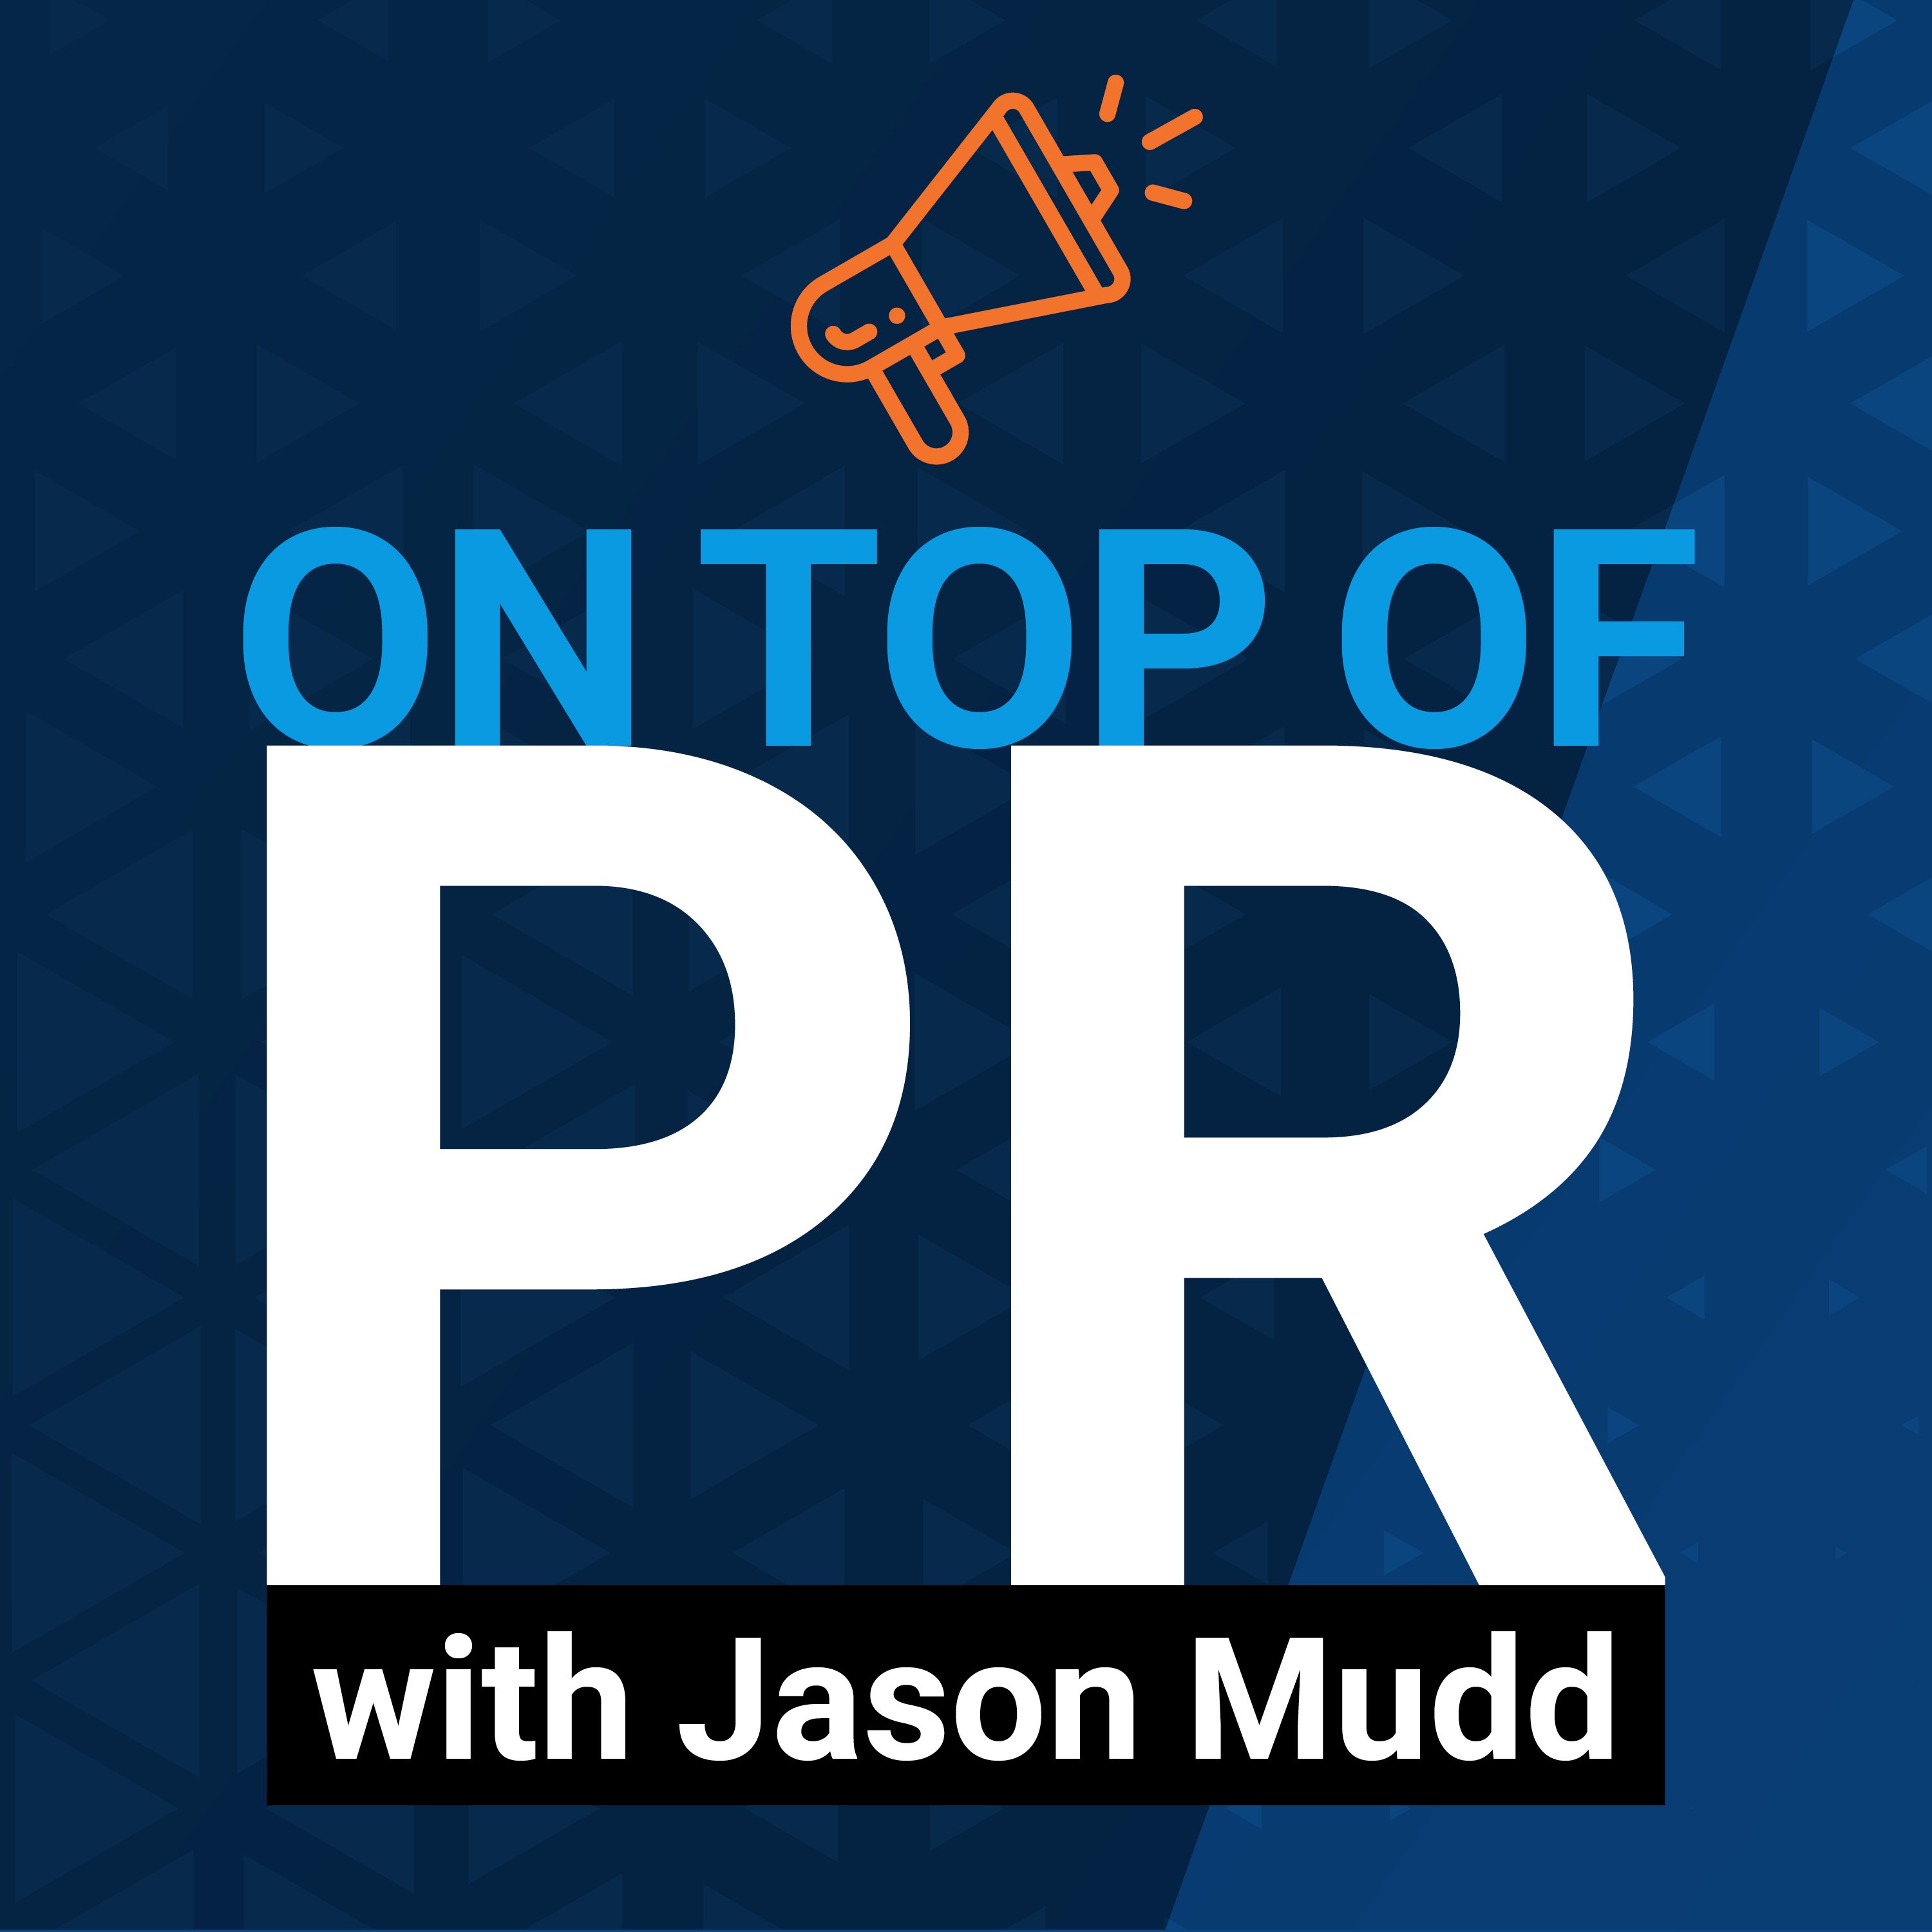 On Top of PR podcast logo.